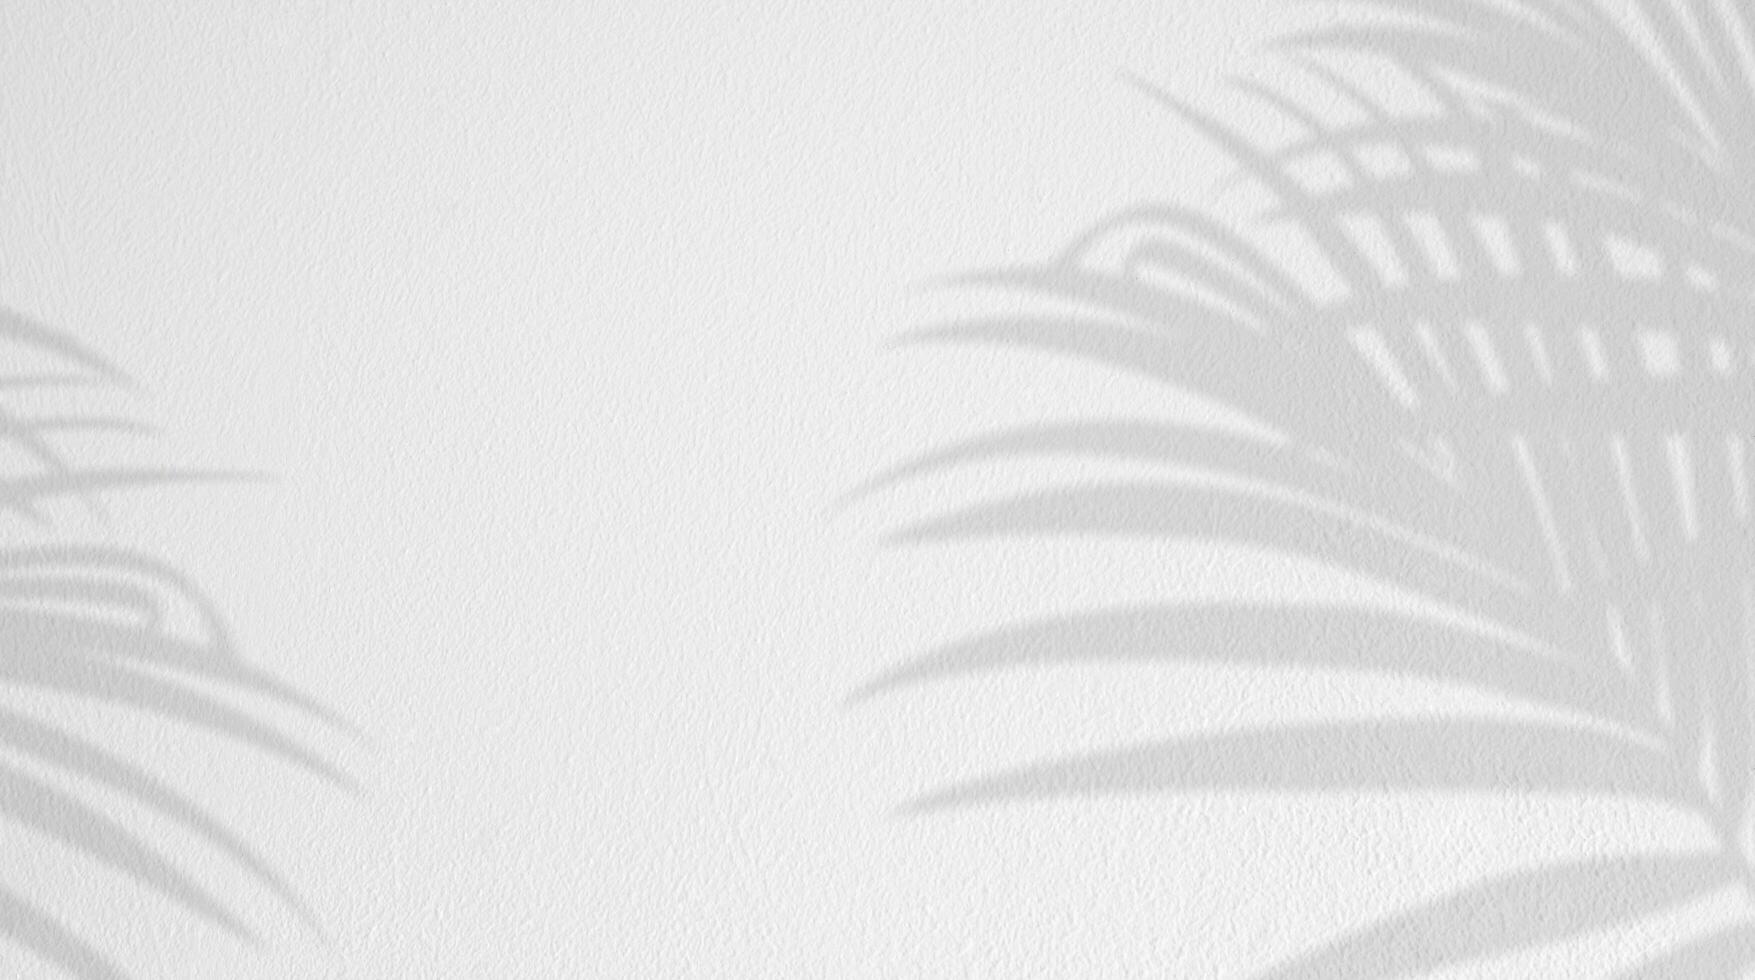 Background White Wall Studio with Light,Palm leaves Shadow,Empty Display Room Background with Sunlight effect on Wall Texture,Backdrop Banner Cement Surface,Concept for  Spring,Summer Cosmetic Product photo